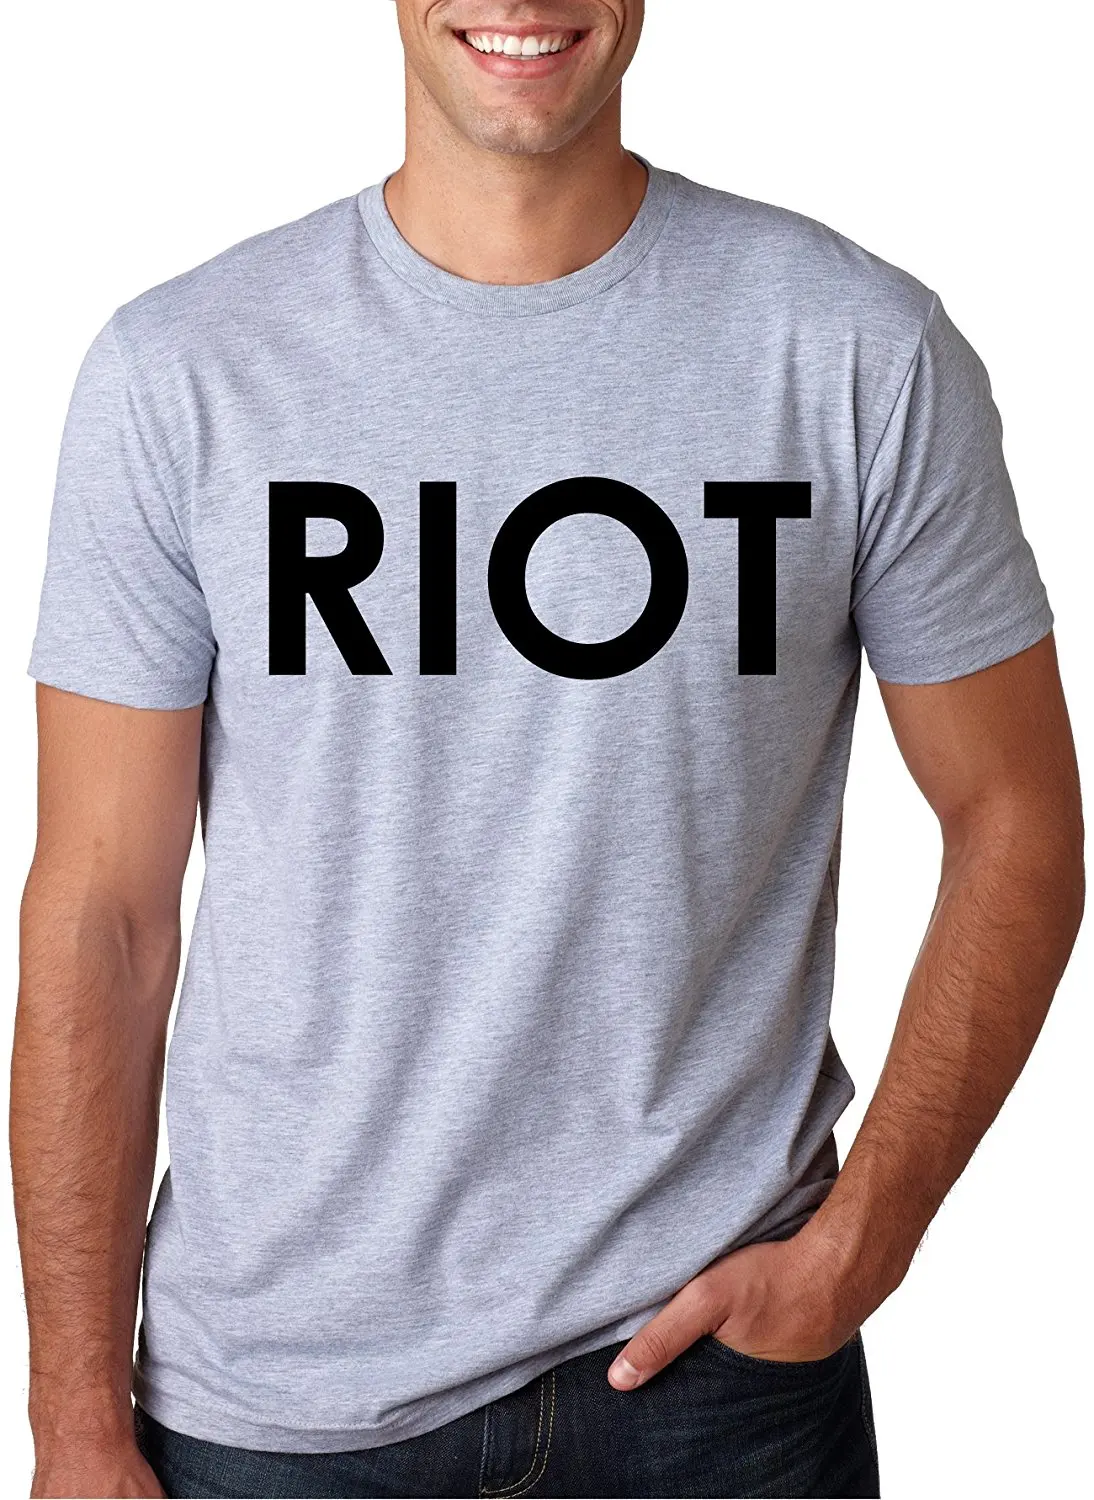 Mens Riot T Shirt Funny Simple Classic Vintage Protest Novelty Tee for ...